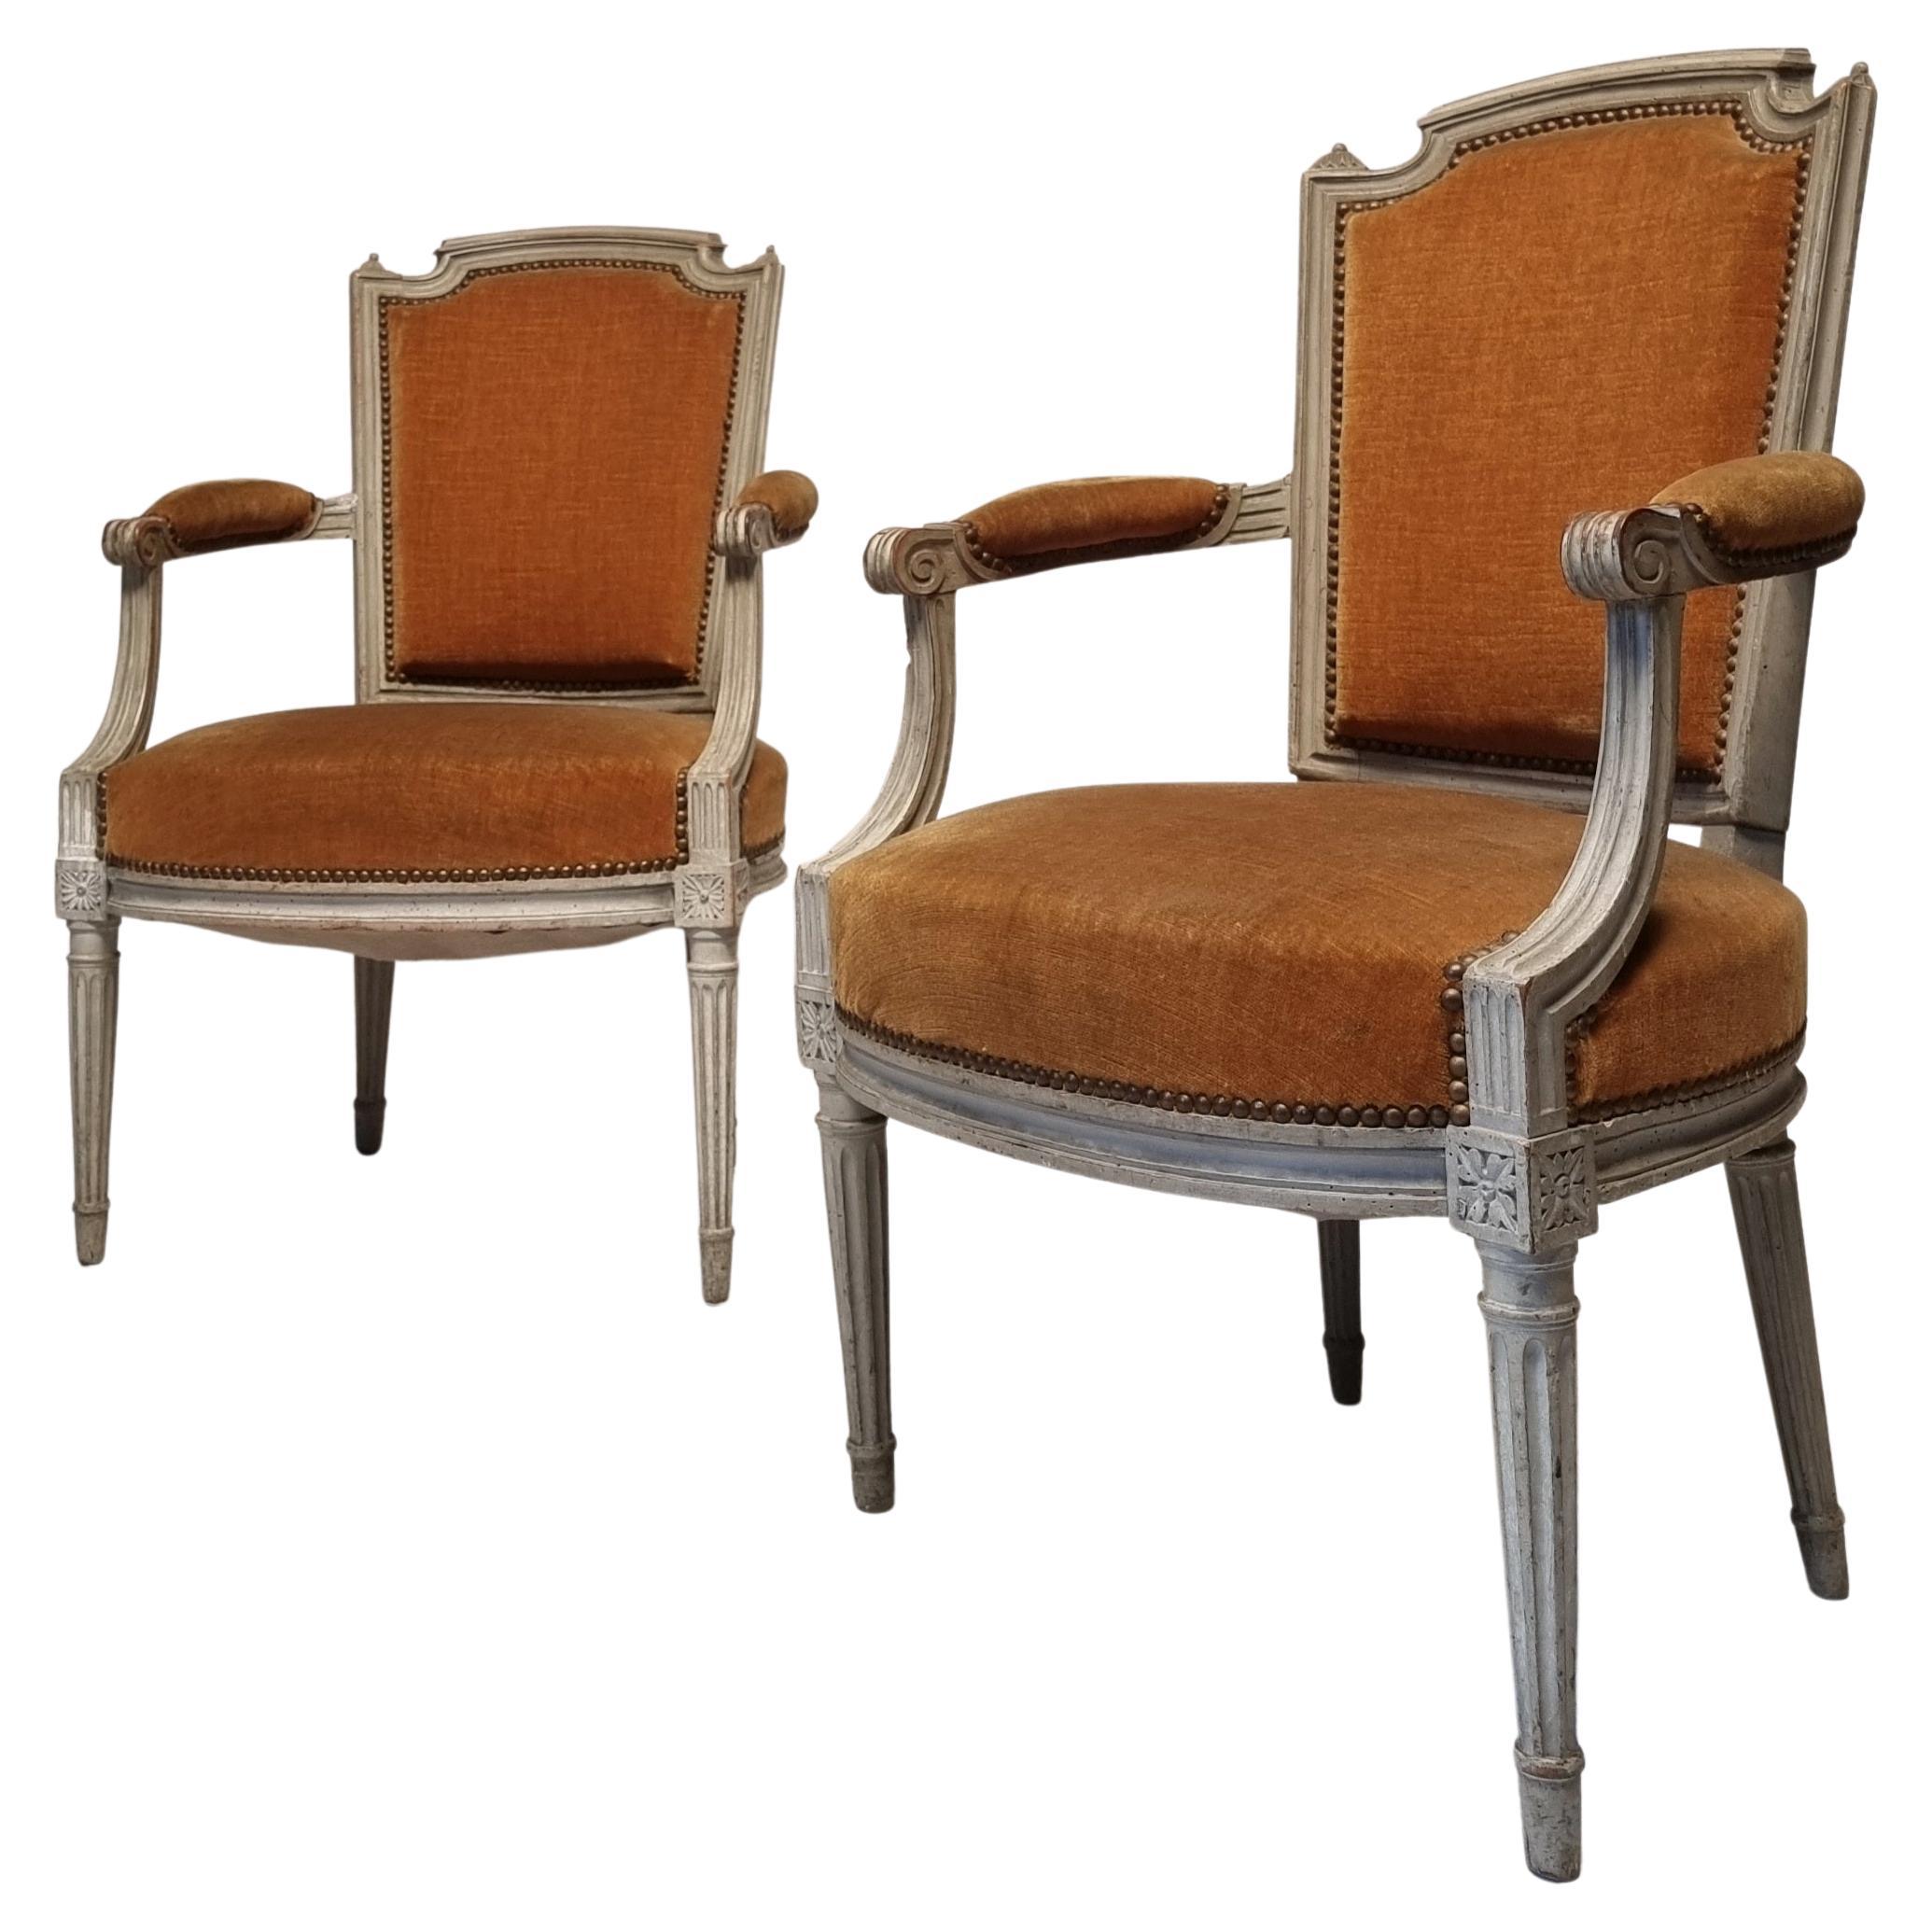 Pair of Louis XVI Armchairs, Lacquered Wood, 18th Century For Sale